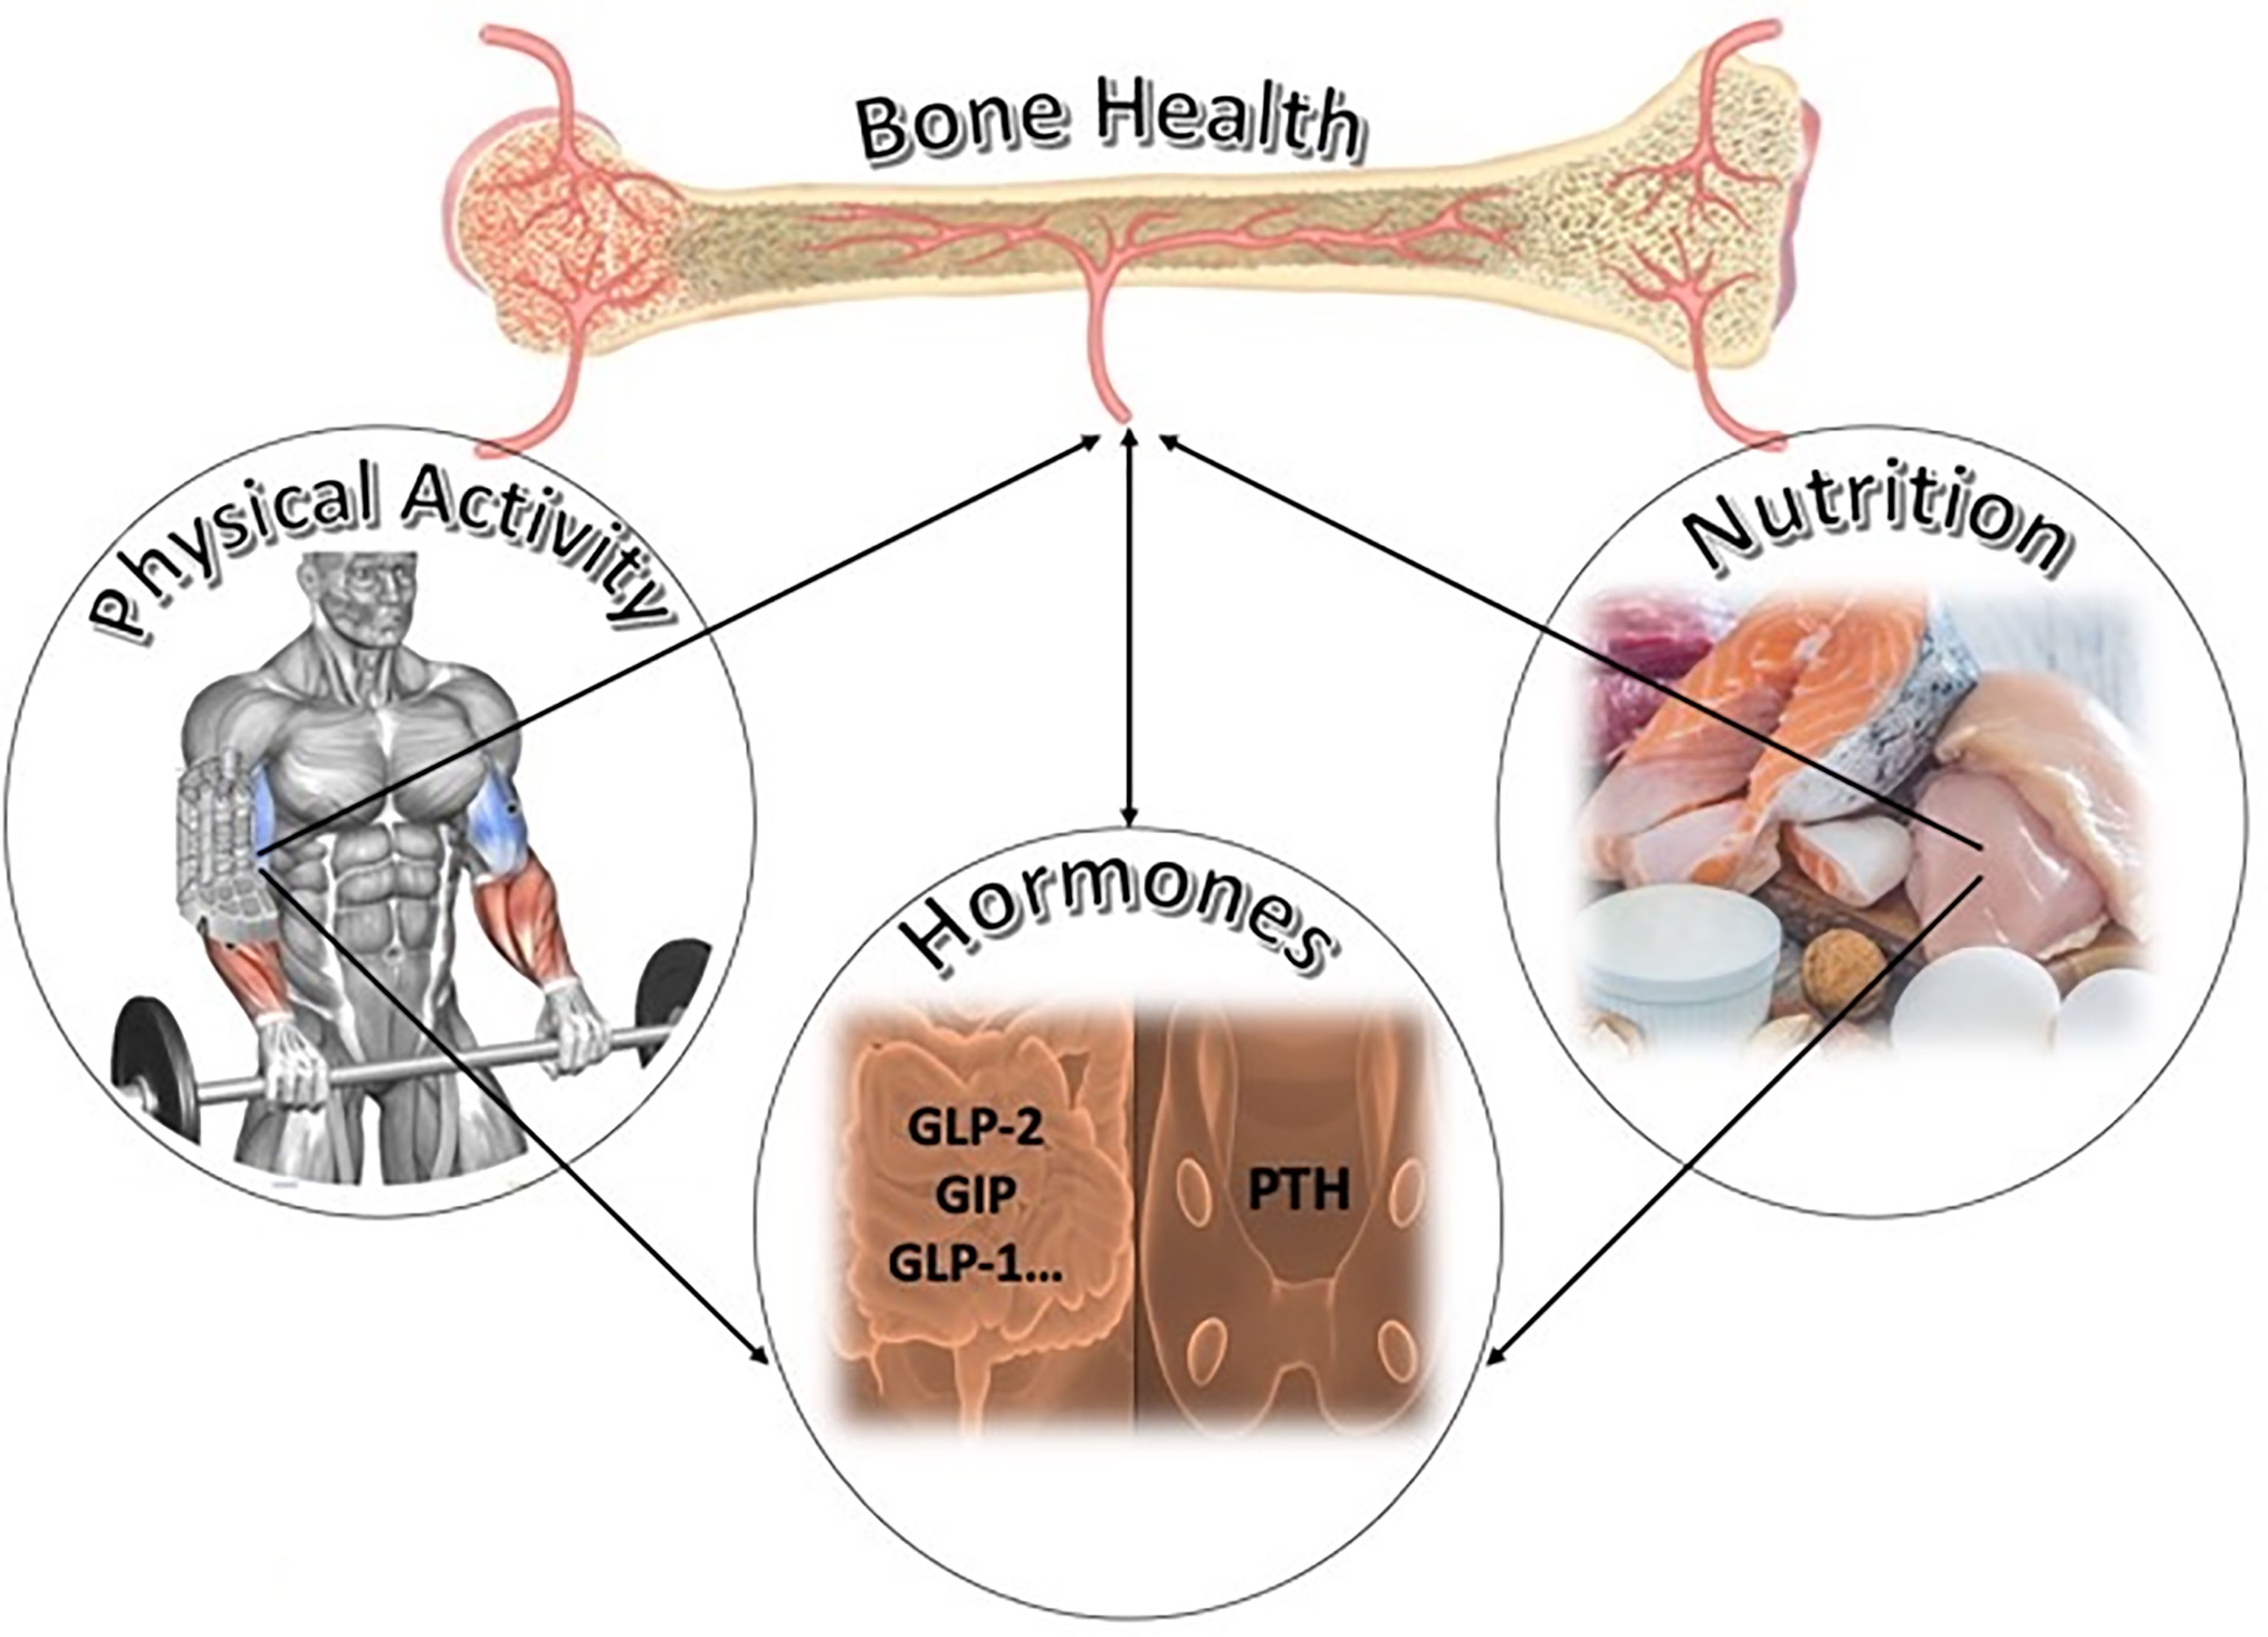 Bone health and physical activity